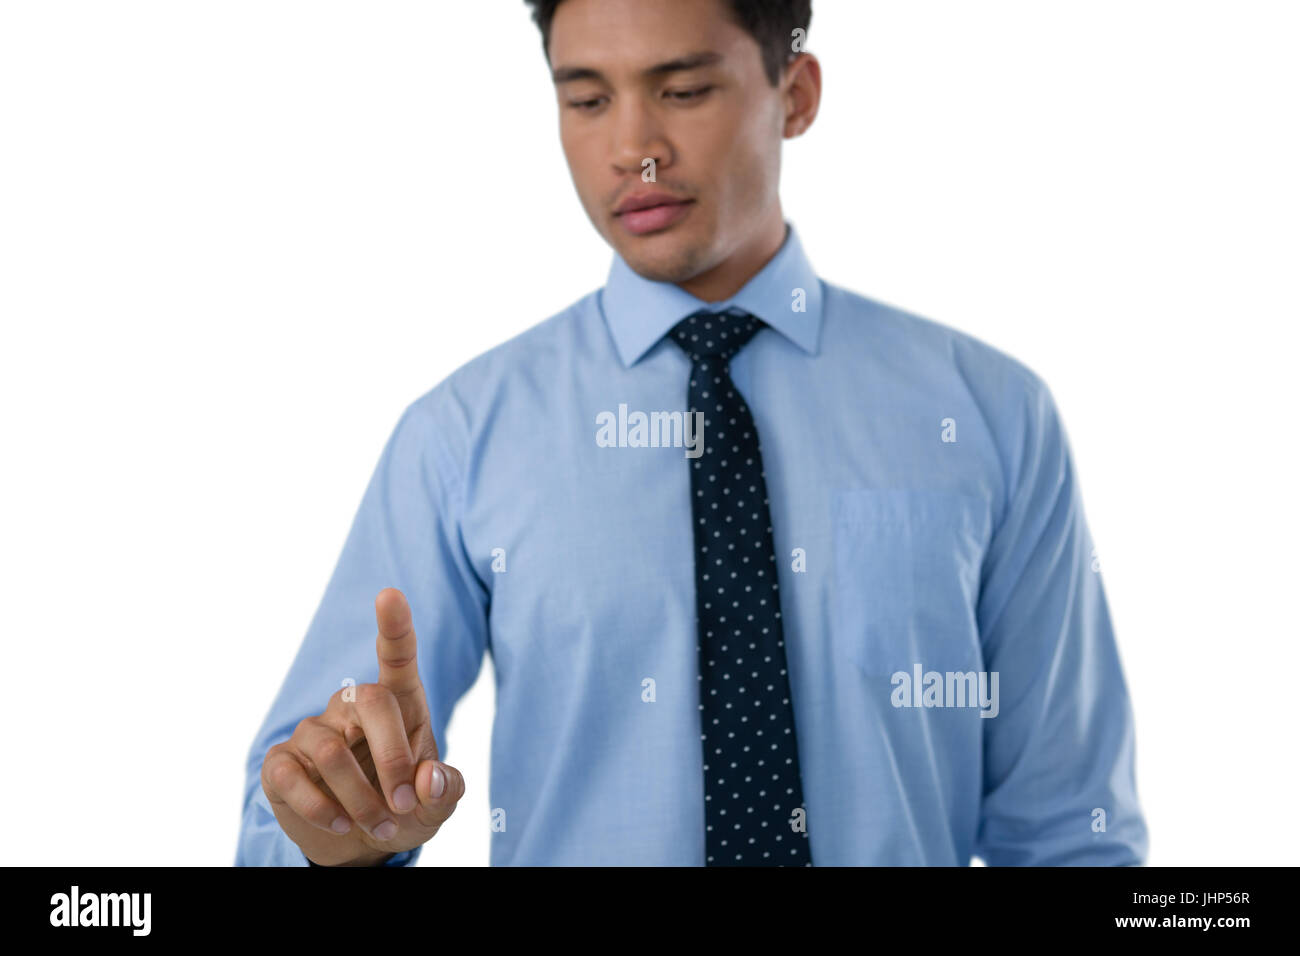 Businessman man wearing tie using interface screen against white background Stock Photo